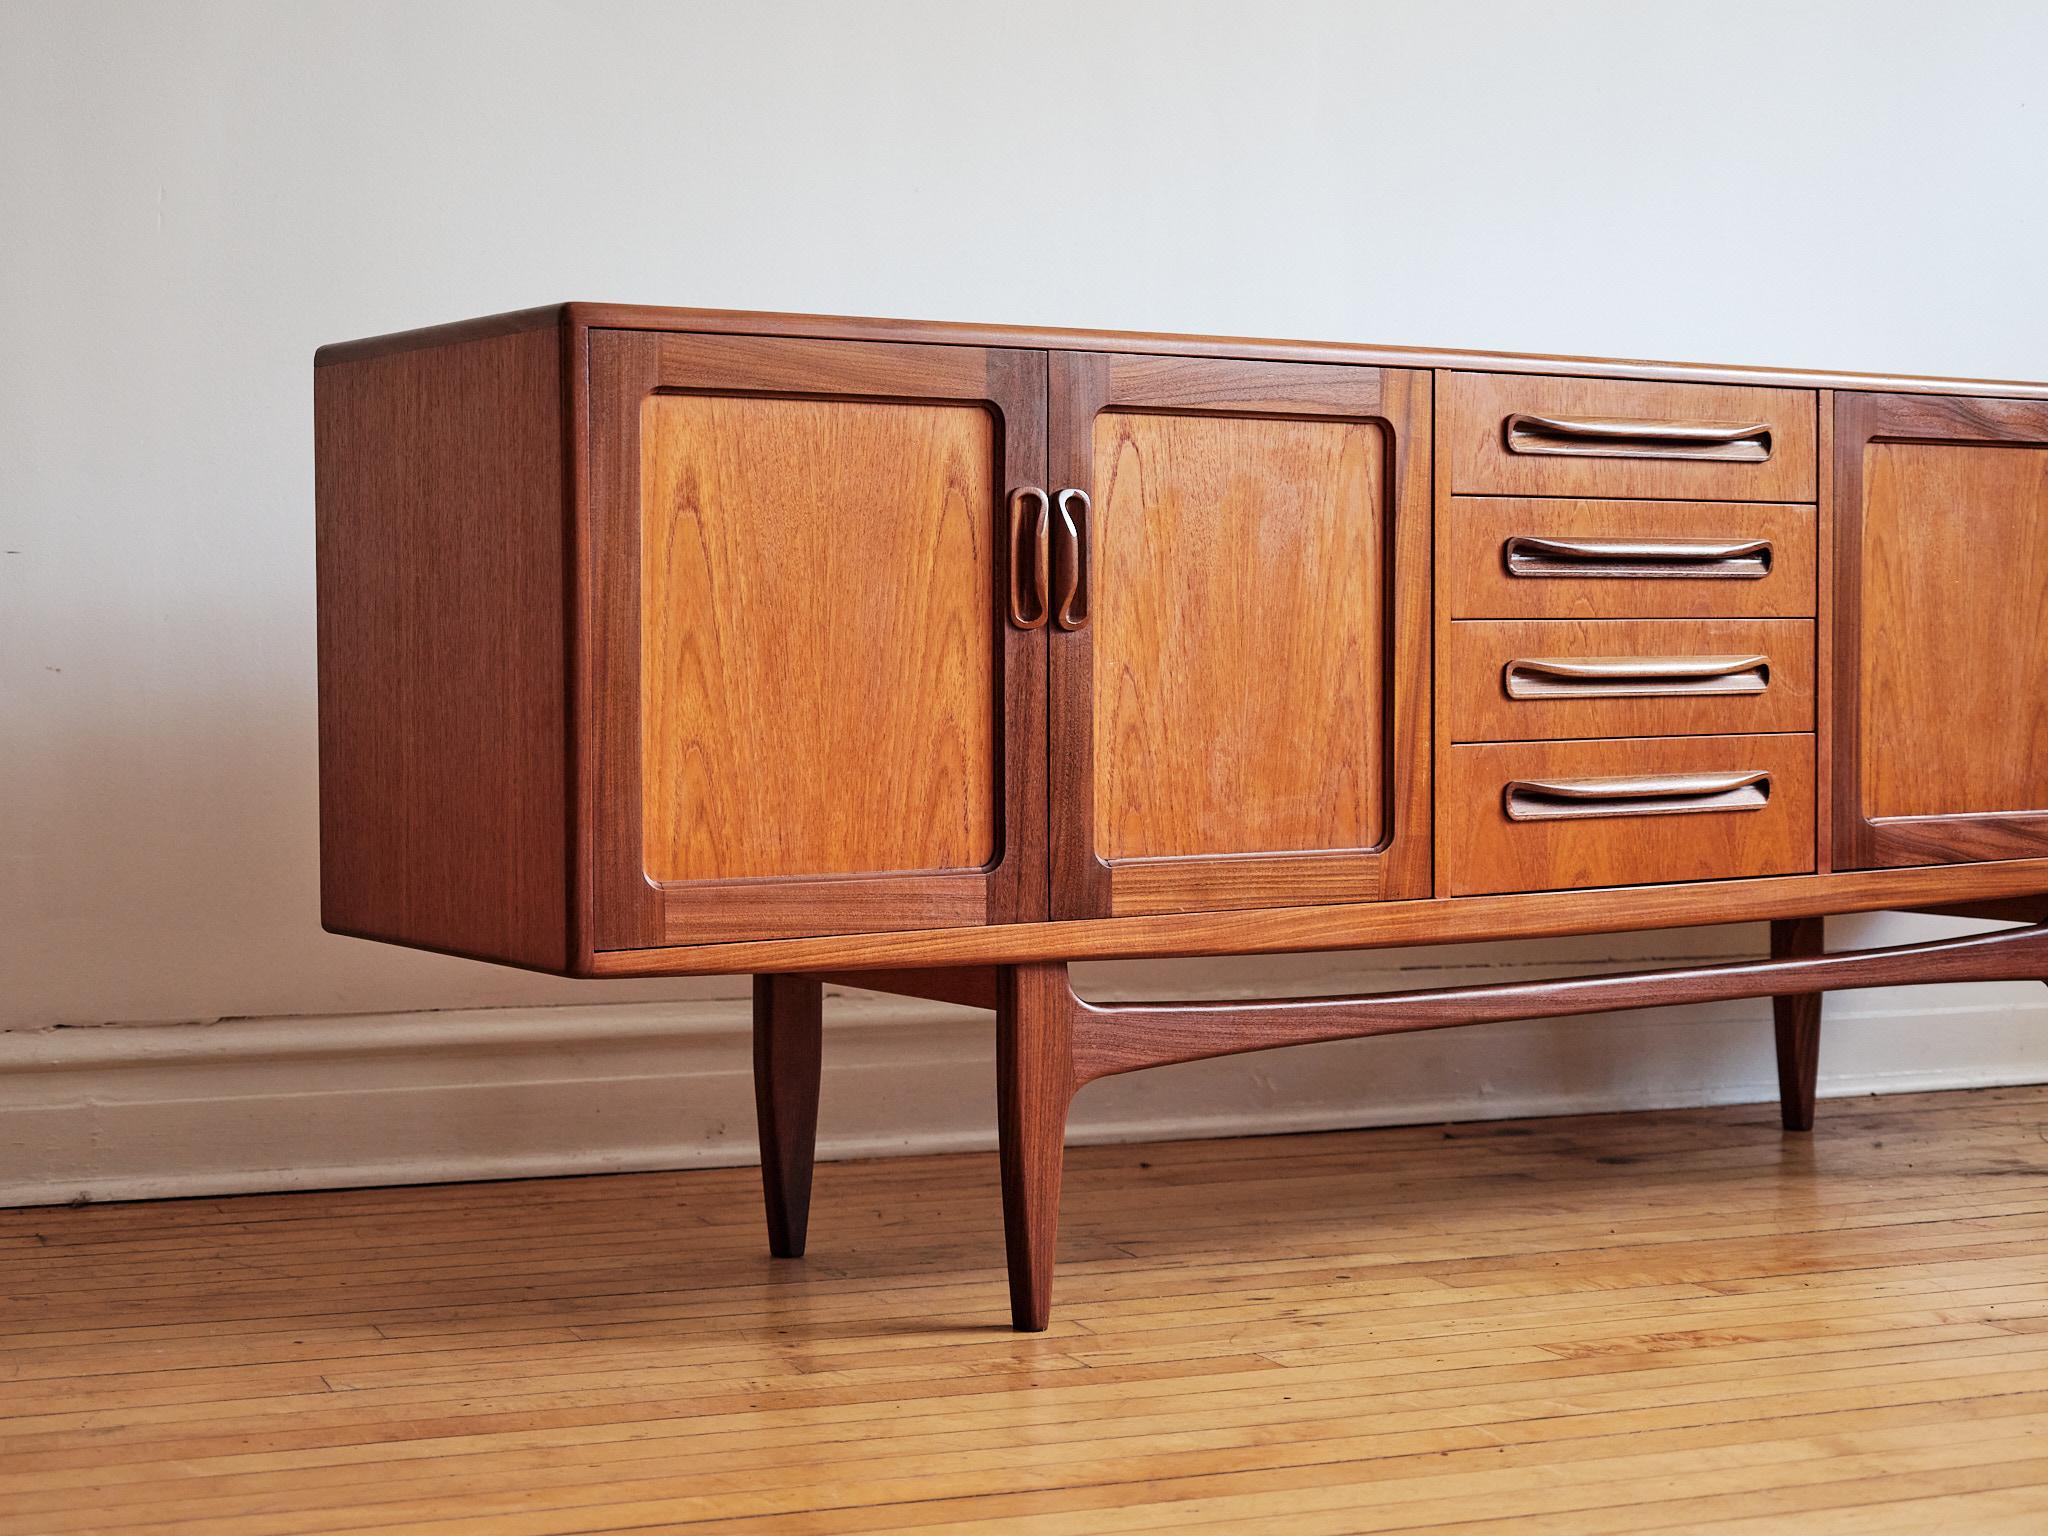 Mid-Century Modern multi-toned teak sideboard.
Just imported from England.
Designed by Victor Wilkins for G Plan's 